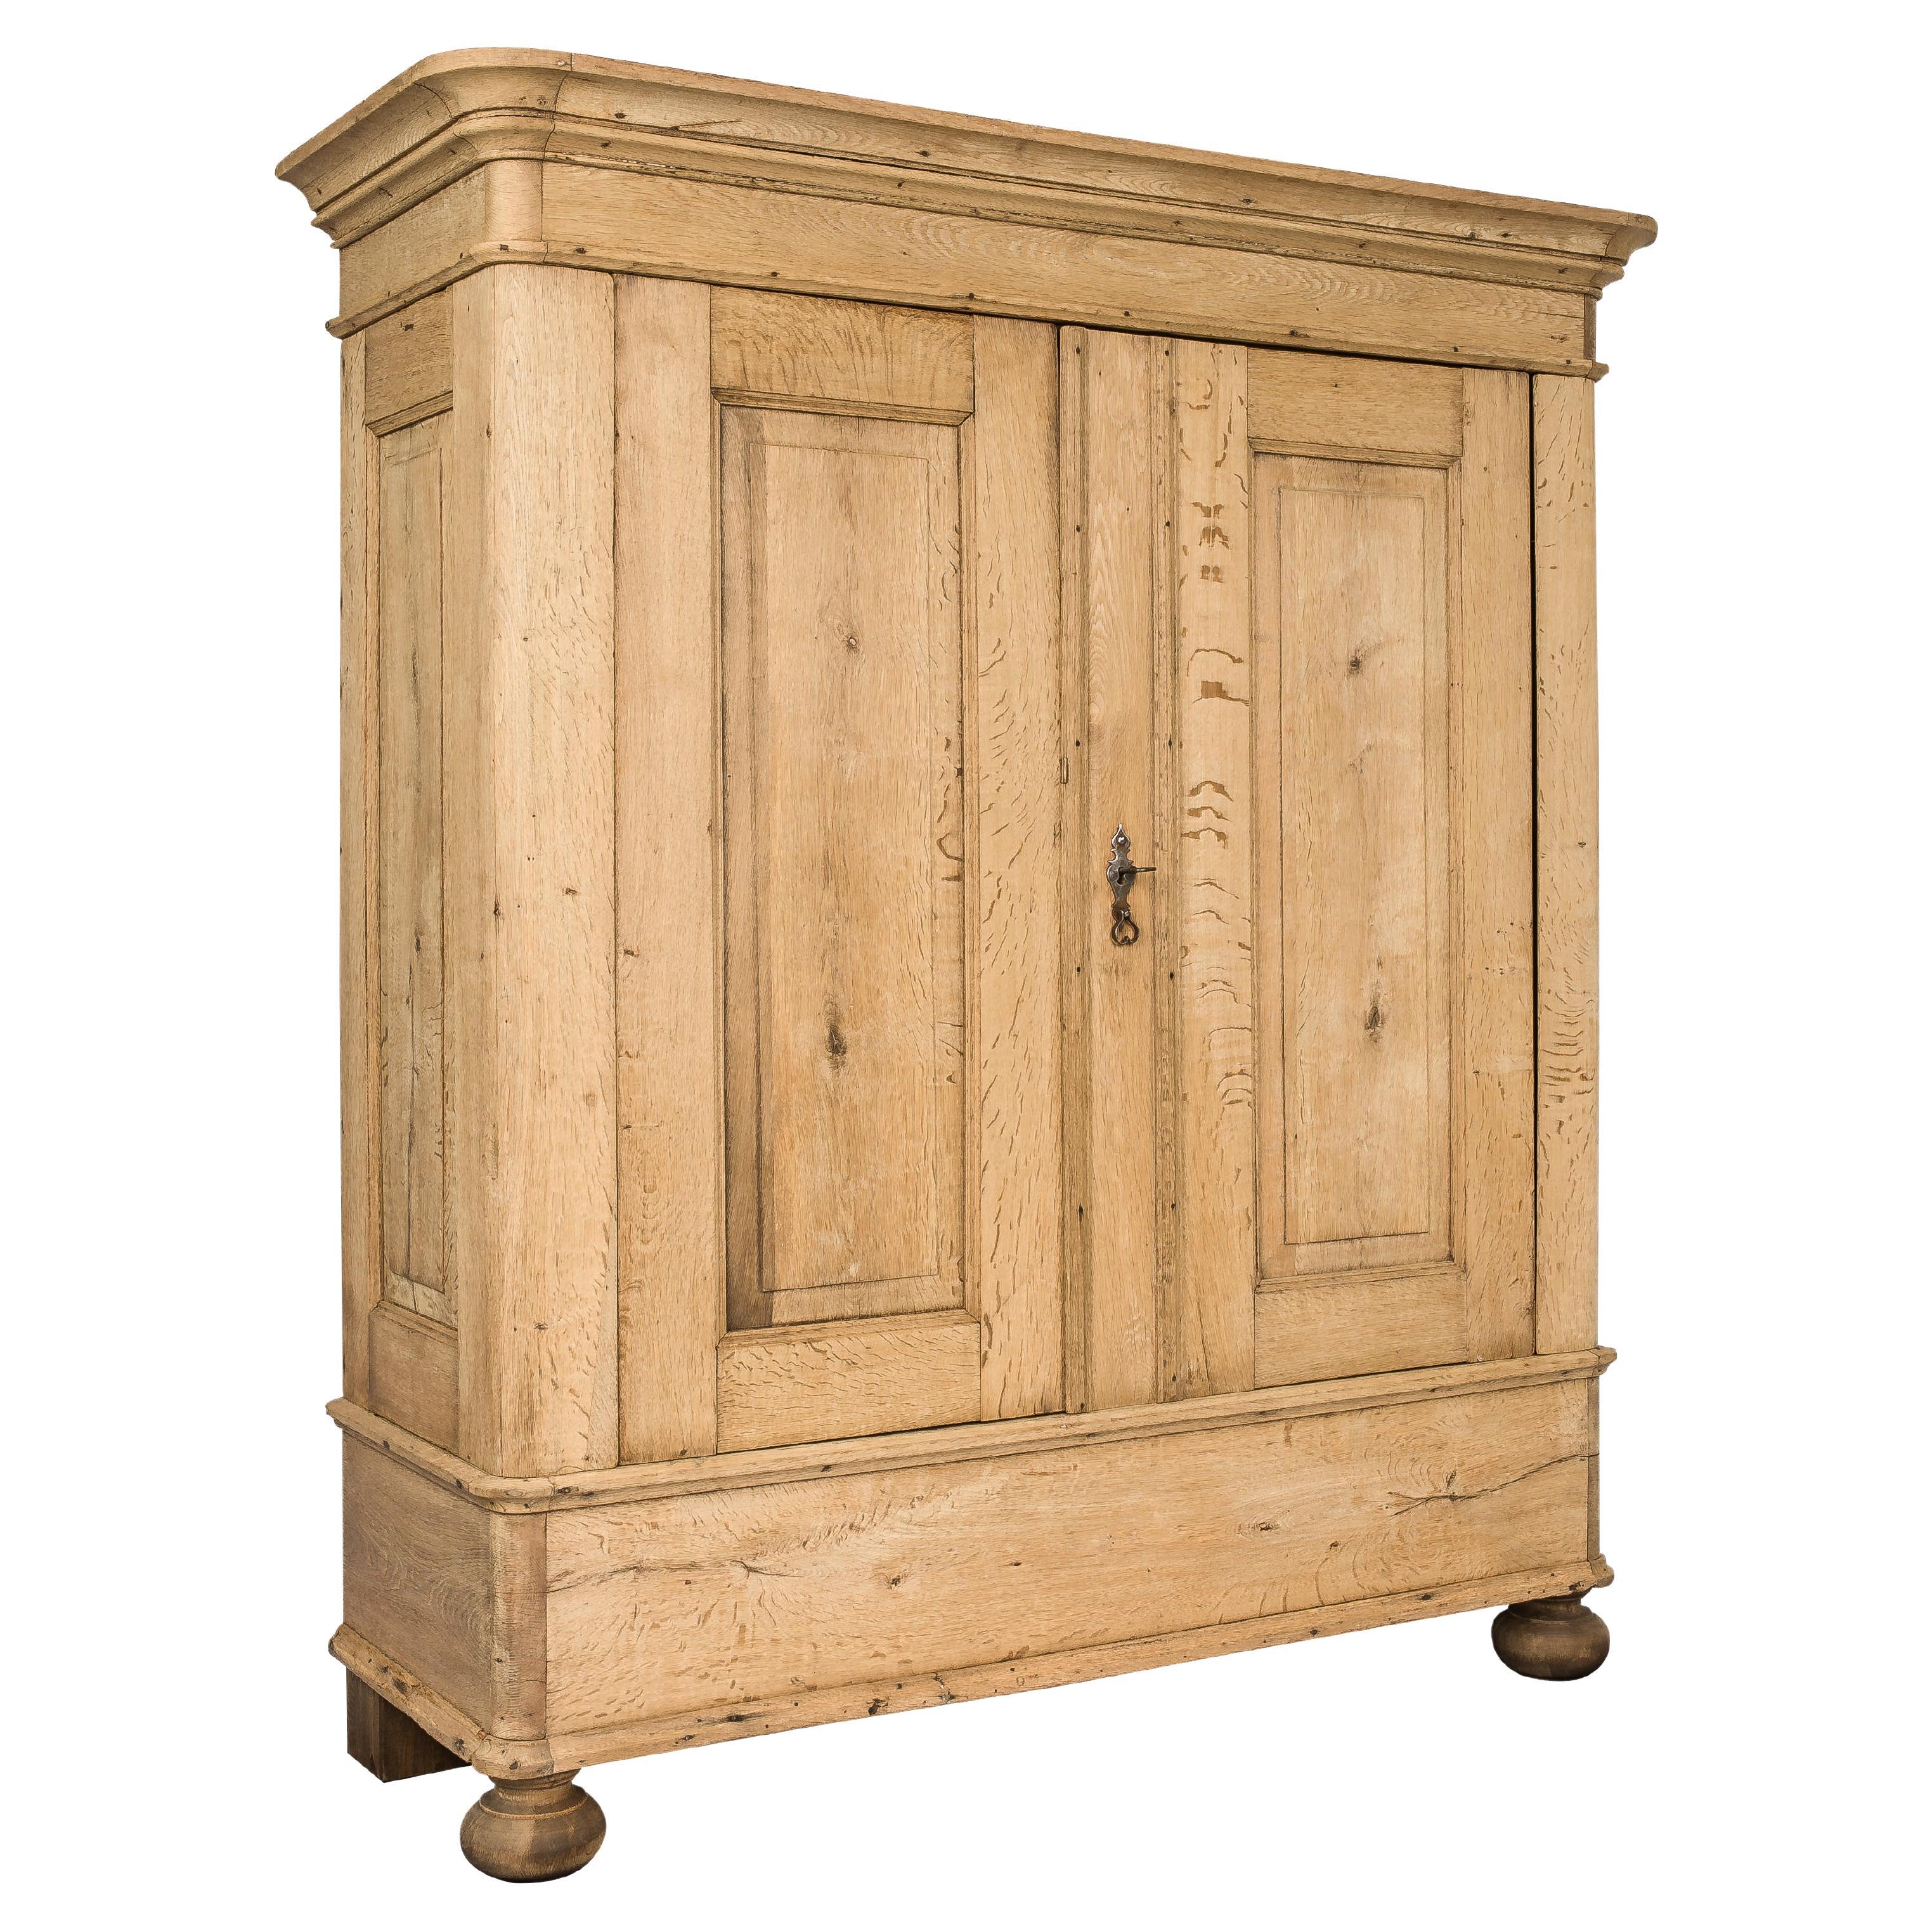 Antique Mid-19th Century German Solid Stripped Oak Two-Door Cabinet